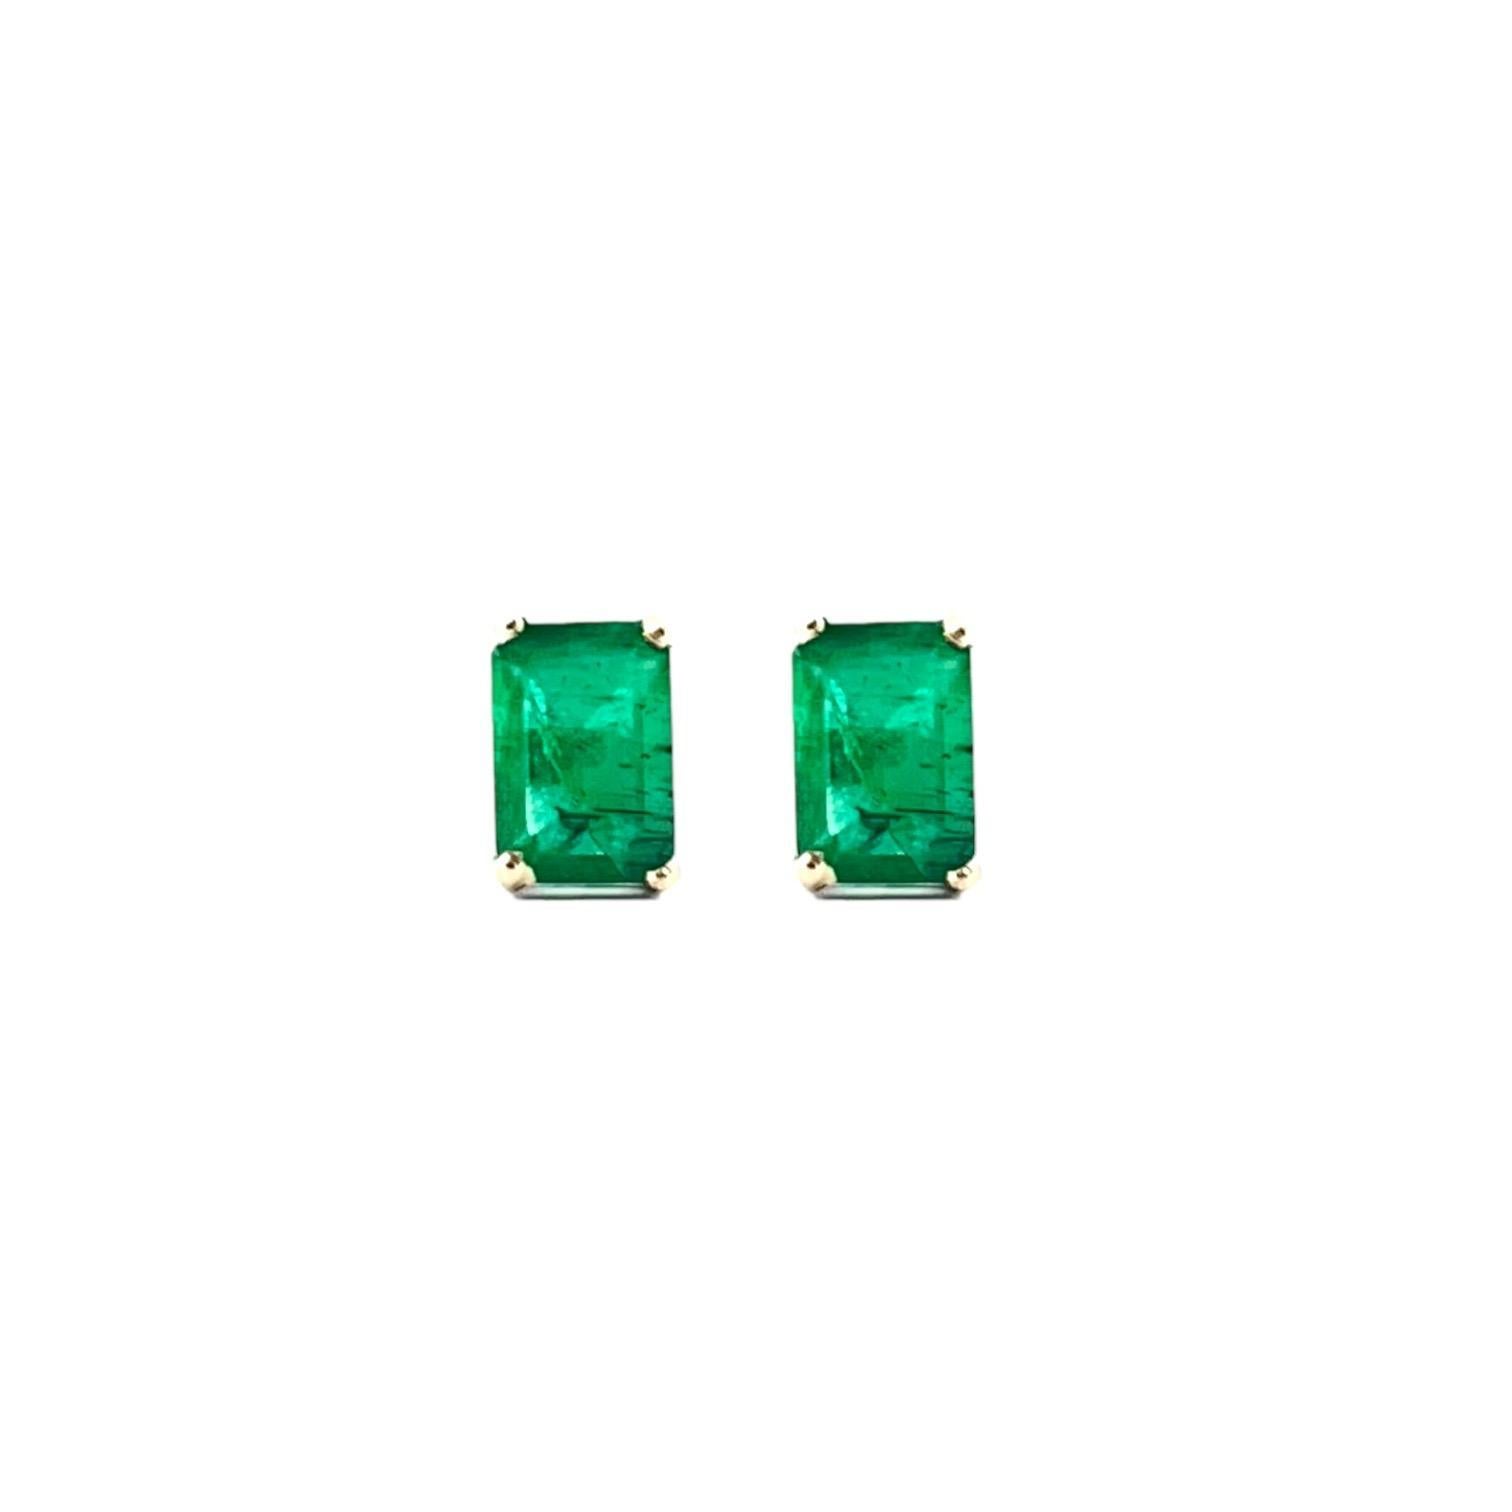 Elevate your elegance with our exquisite Emerald Gemstone Stud Earrings, available in sizes ranging from 1 to 1.05 carats. These earrings showcase captivating emeralds, known for their deep green allure. Add a touch of natural beauty and